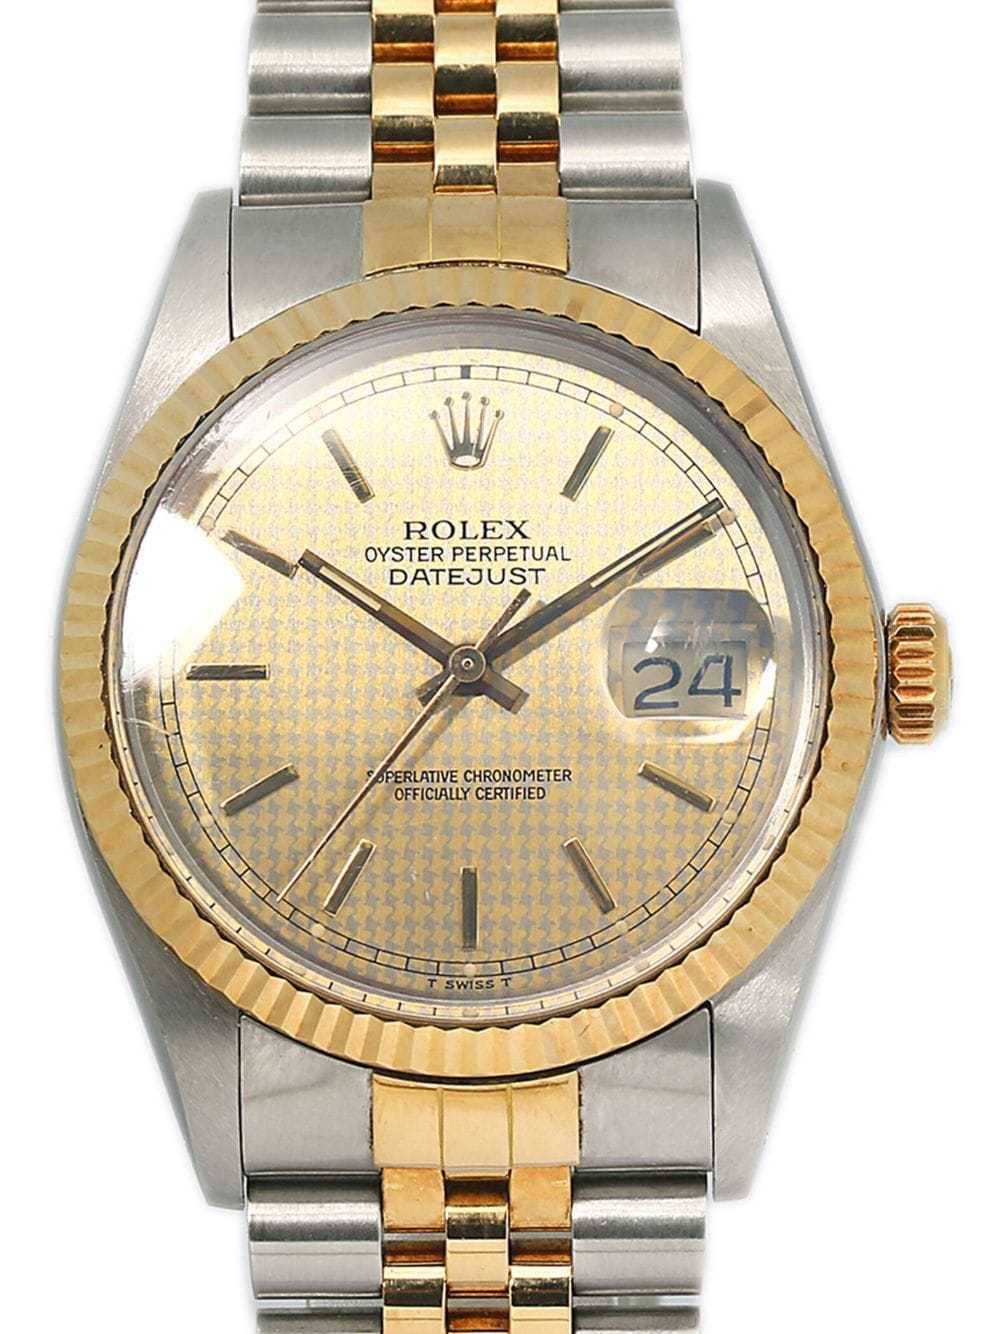 Rolex pre-owned Datejust 36mm - Neutrals - image 2